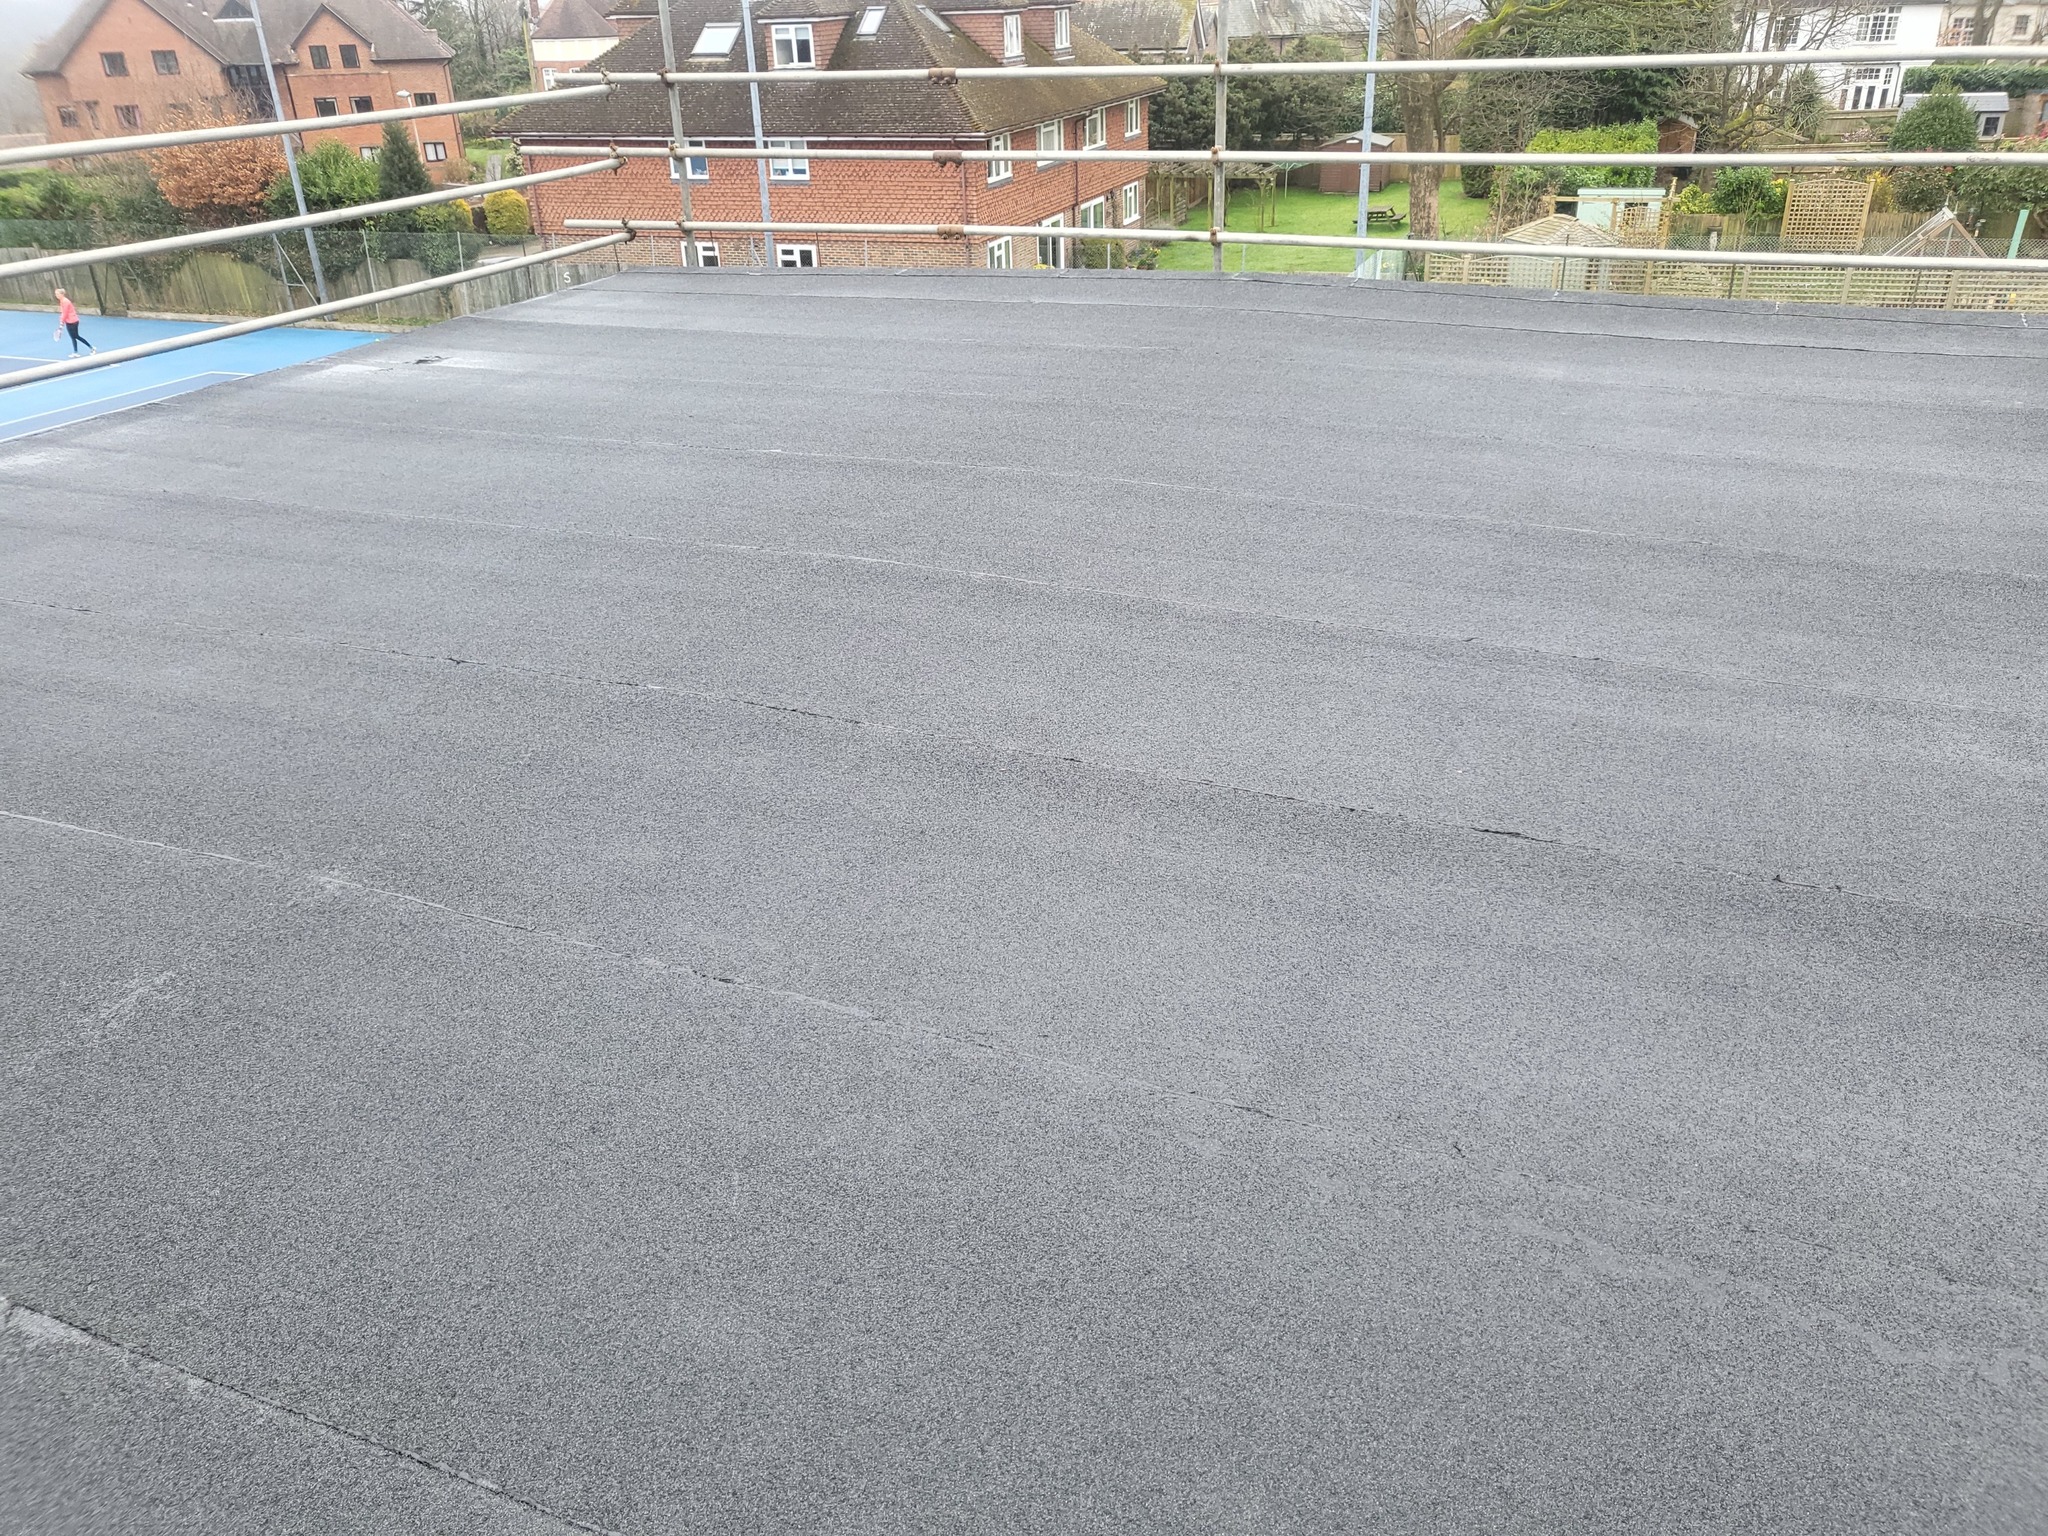 Felting replacement work to the squash court roofs in East Grinstead